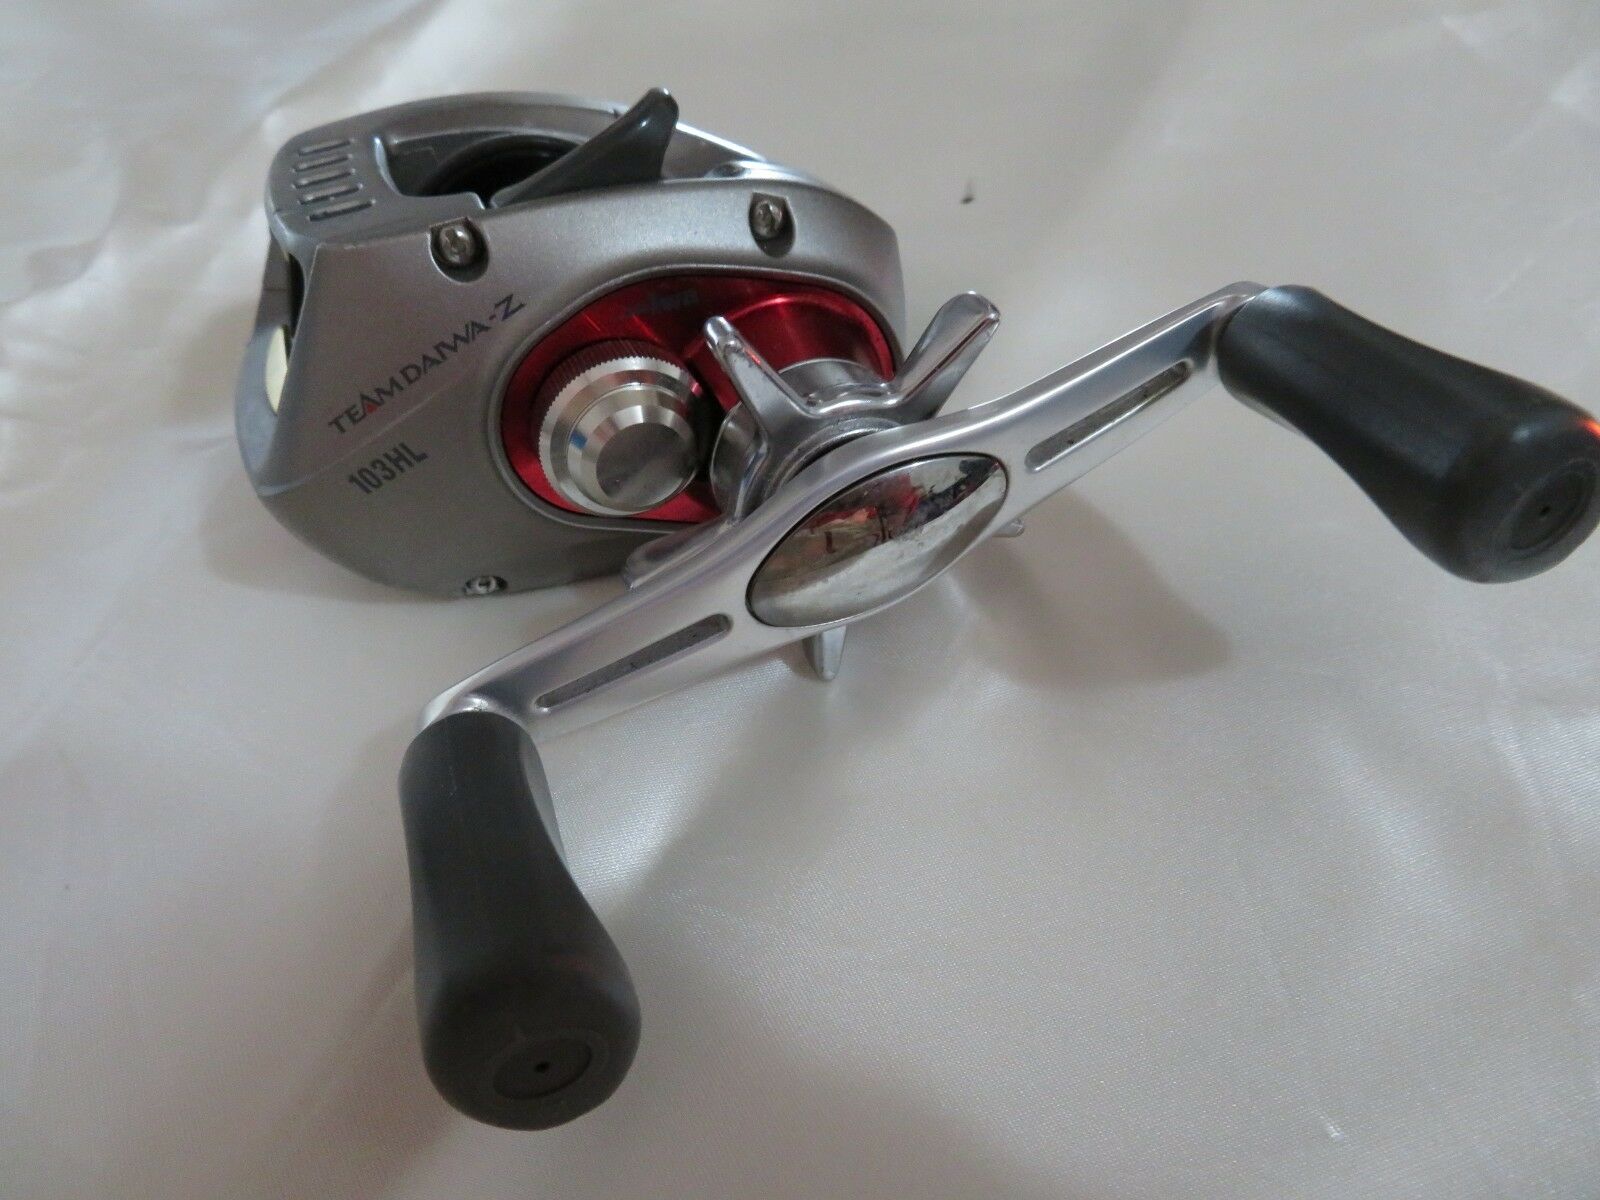 TEAM DAIWA-Z TD-Z 2506C /fishing /Reel /No noticeable scratches or